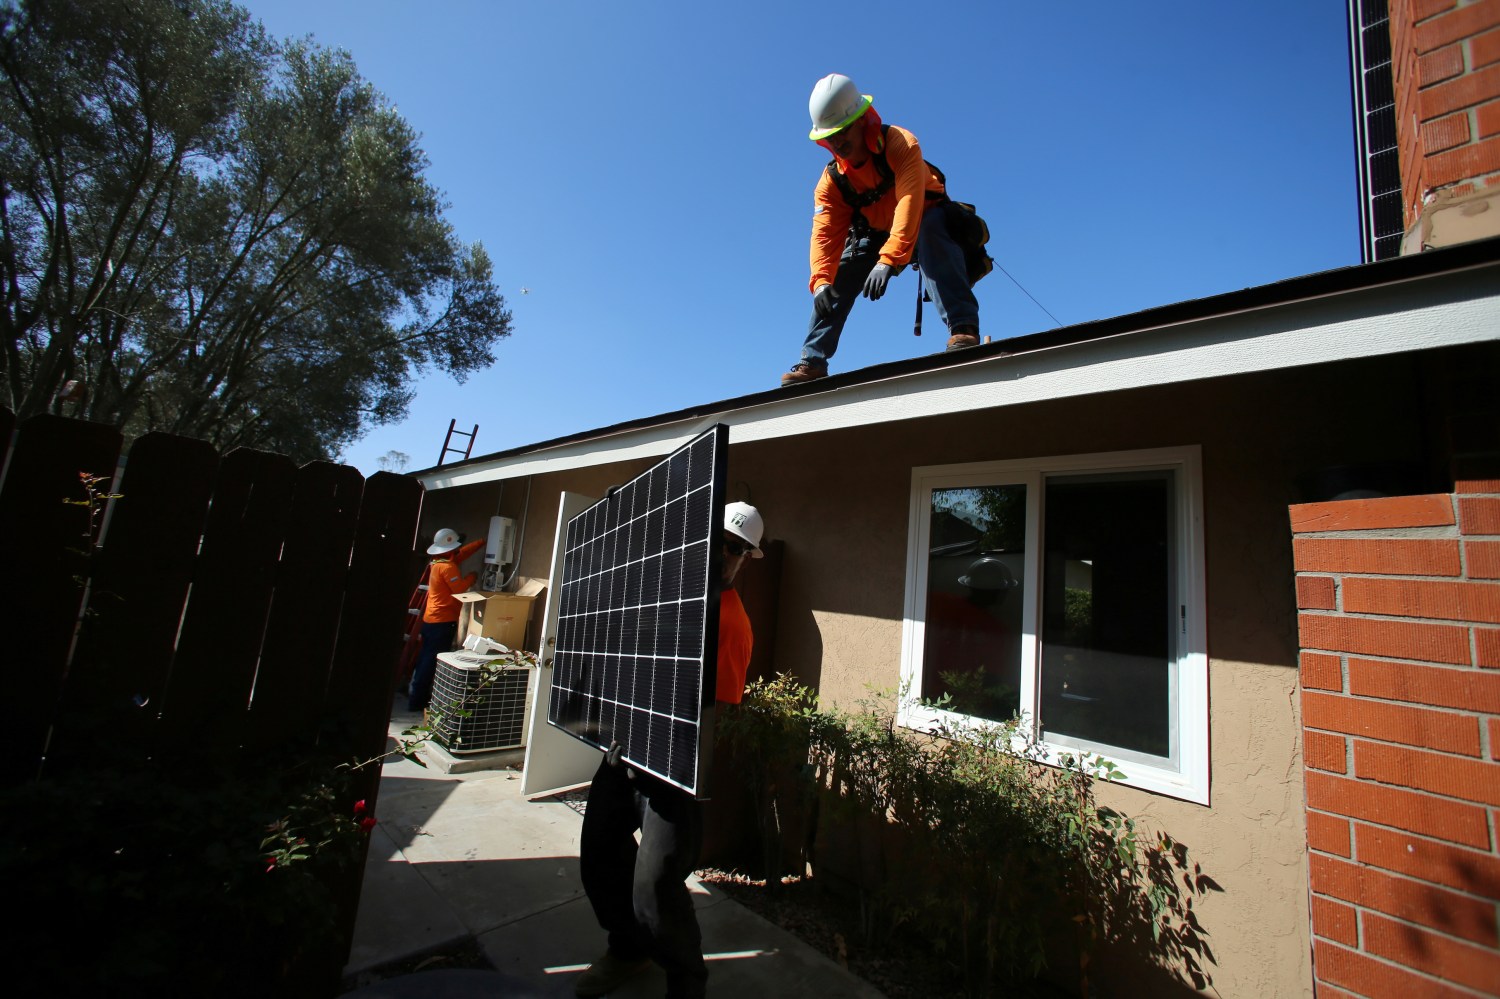 Workers lift a solar panel onto a roof during a residential solar installation in Scripps Ranch, San Diego, California, U.S. October 14, 2016. Picture taken October 14, 2016.       REUTERS/Mike Blake - S1AEUJDNLIAD